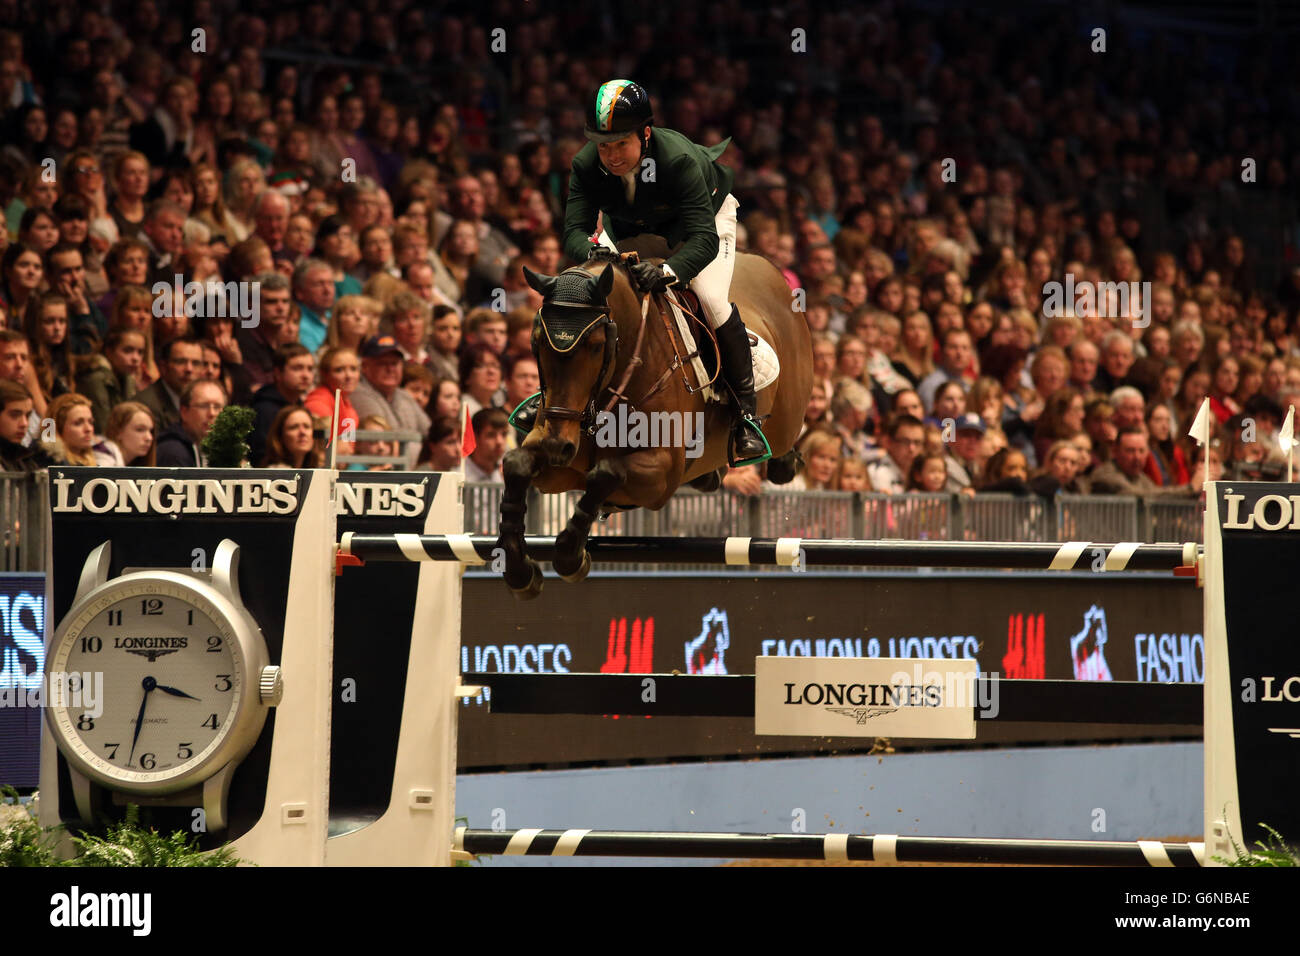 Ireland's Cian O'Connor riding Cooper competes in the Longines FEI World Cup during day six of The London International Horse Show at the Olympia Exhibition Hall, London. Stock Photo